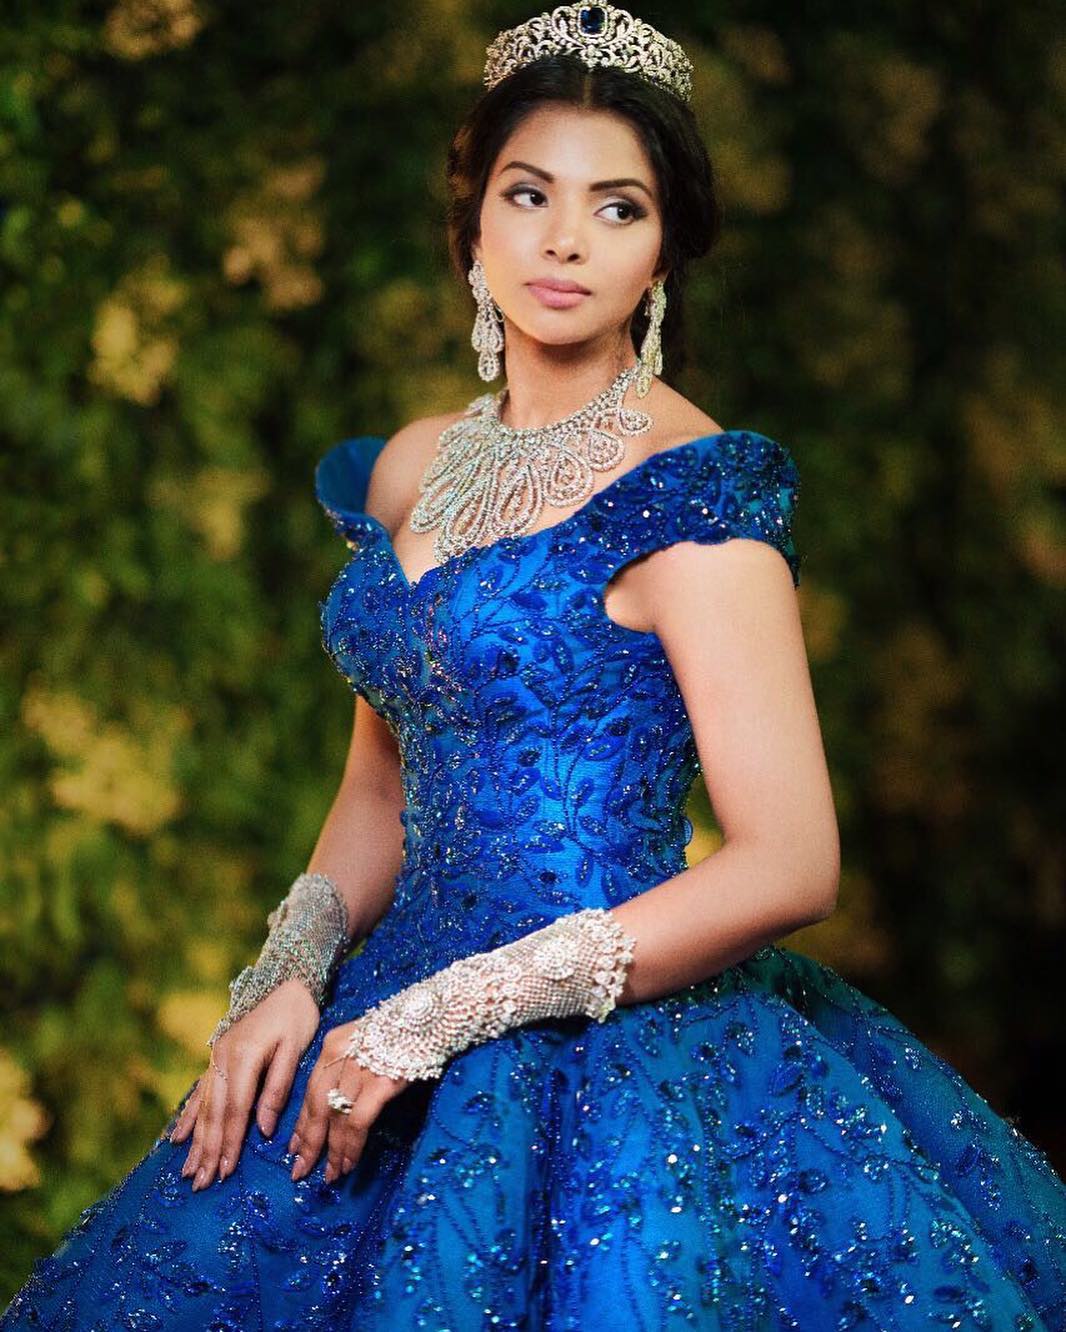 Aishwarya Looks Resplendent As She Dons A Blue Gown For A Recent Event See  Pics  News18